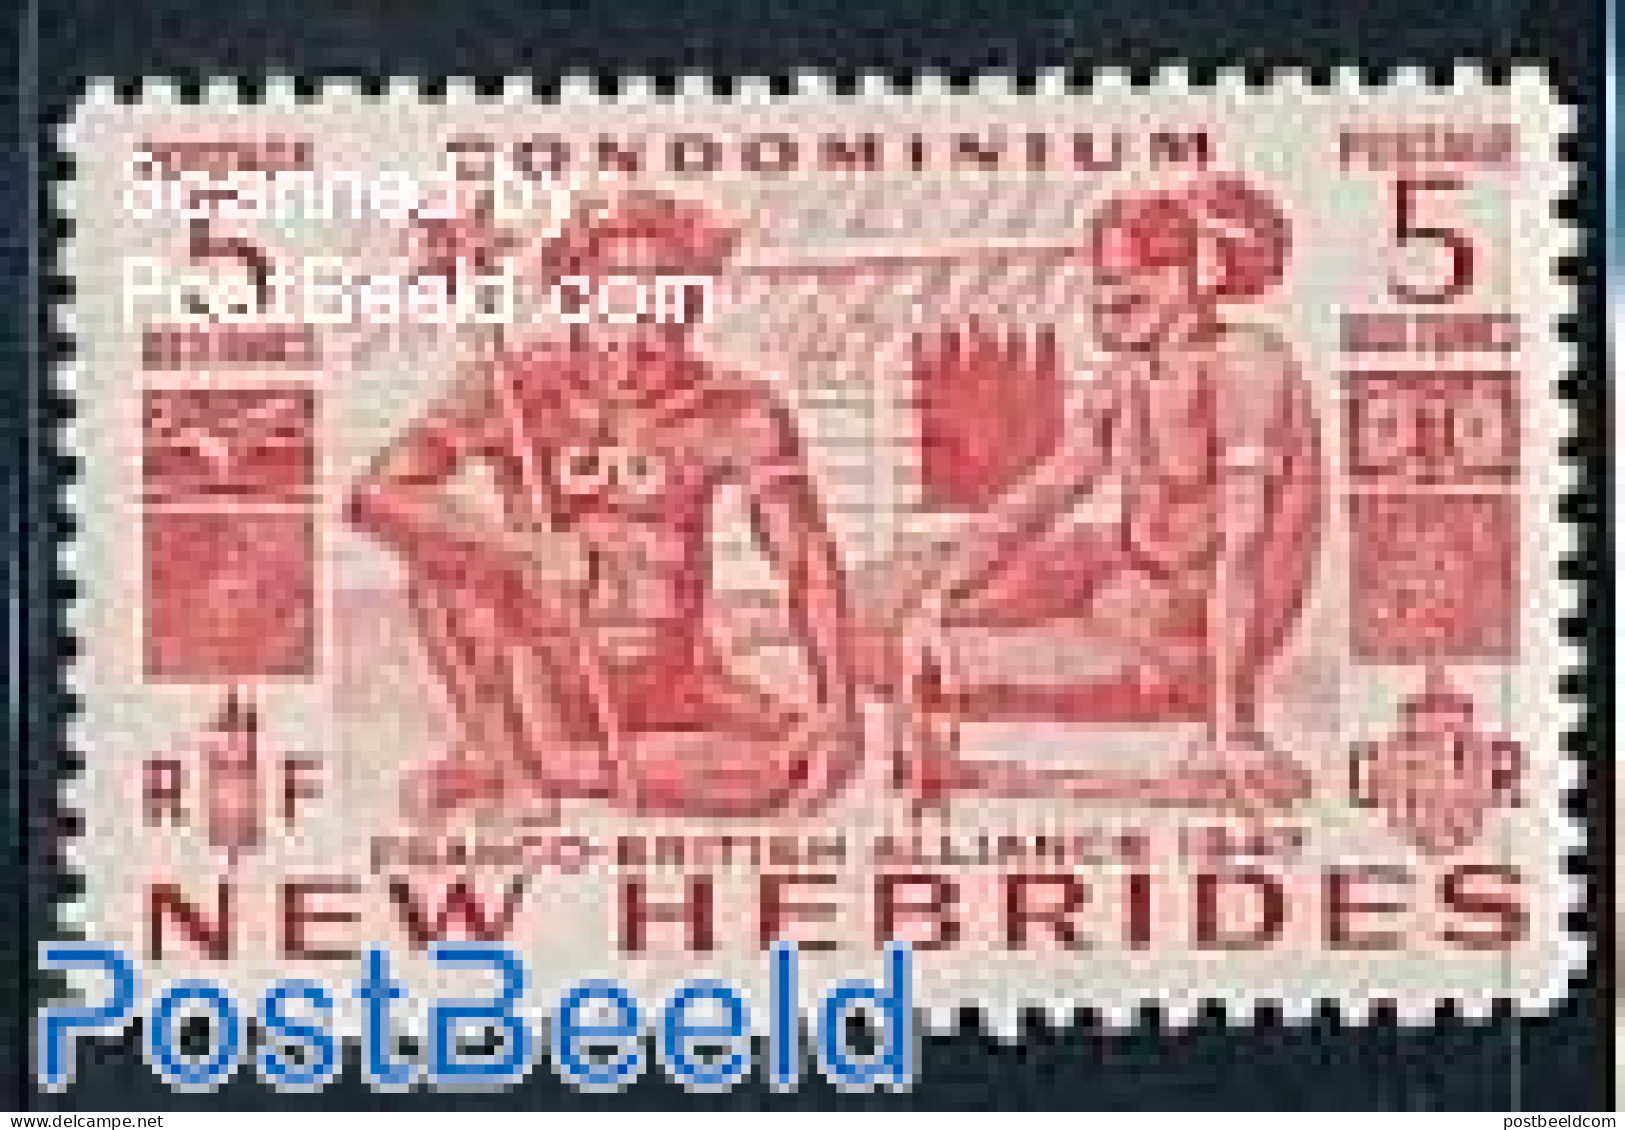 New Hebrides 1953 5F, Stamp Out Of Set, Mint NH, History - Nuovi